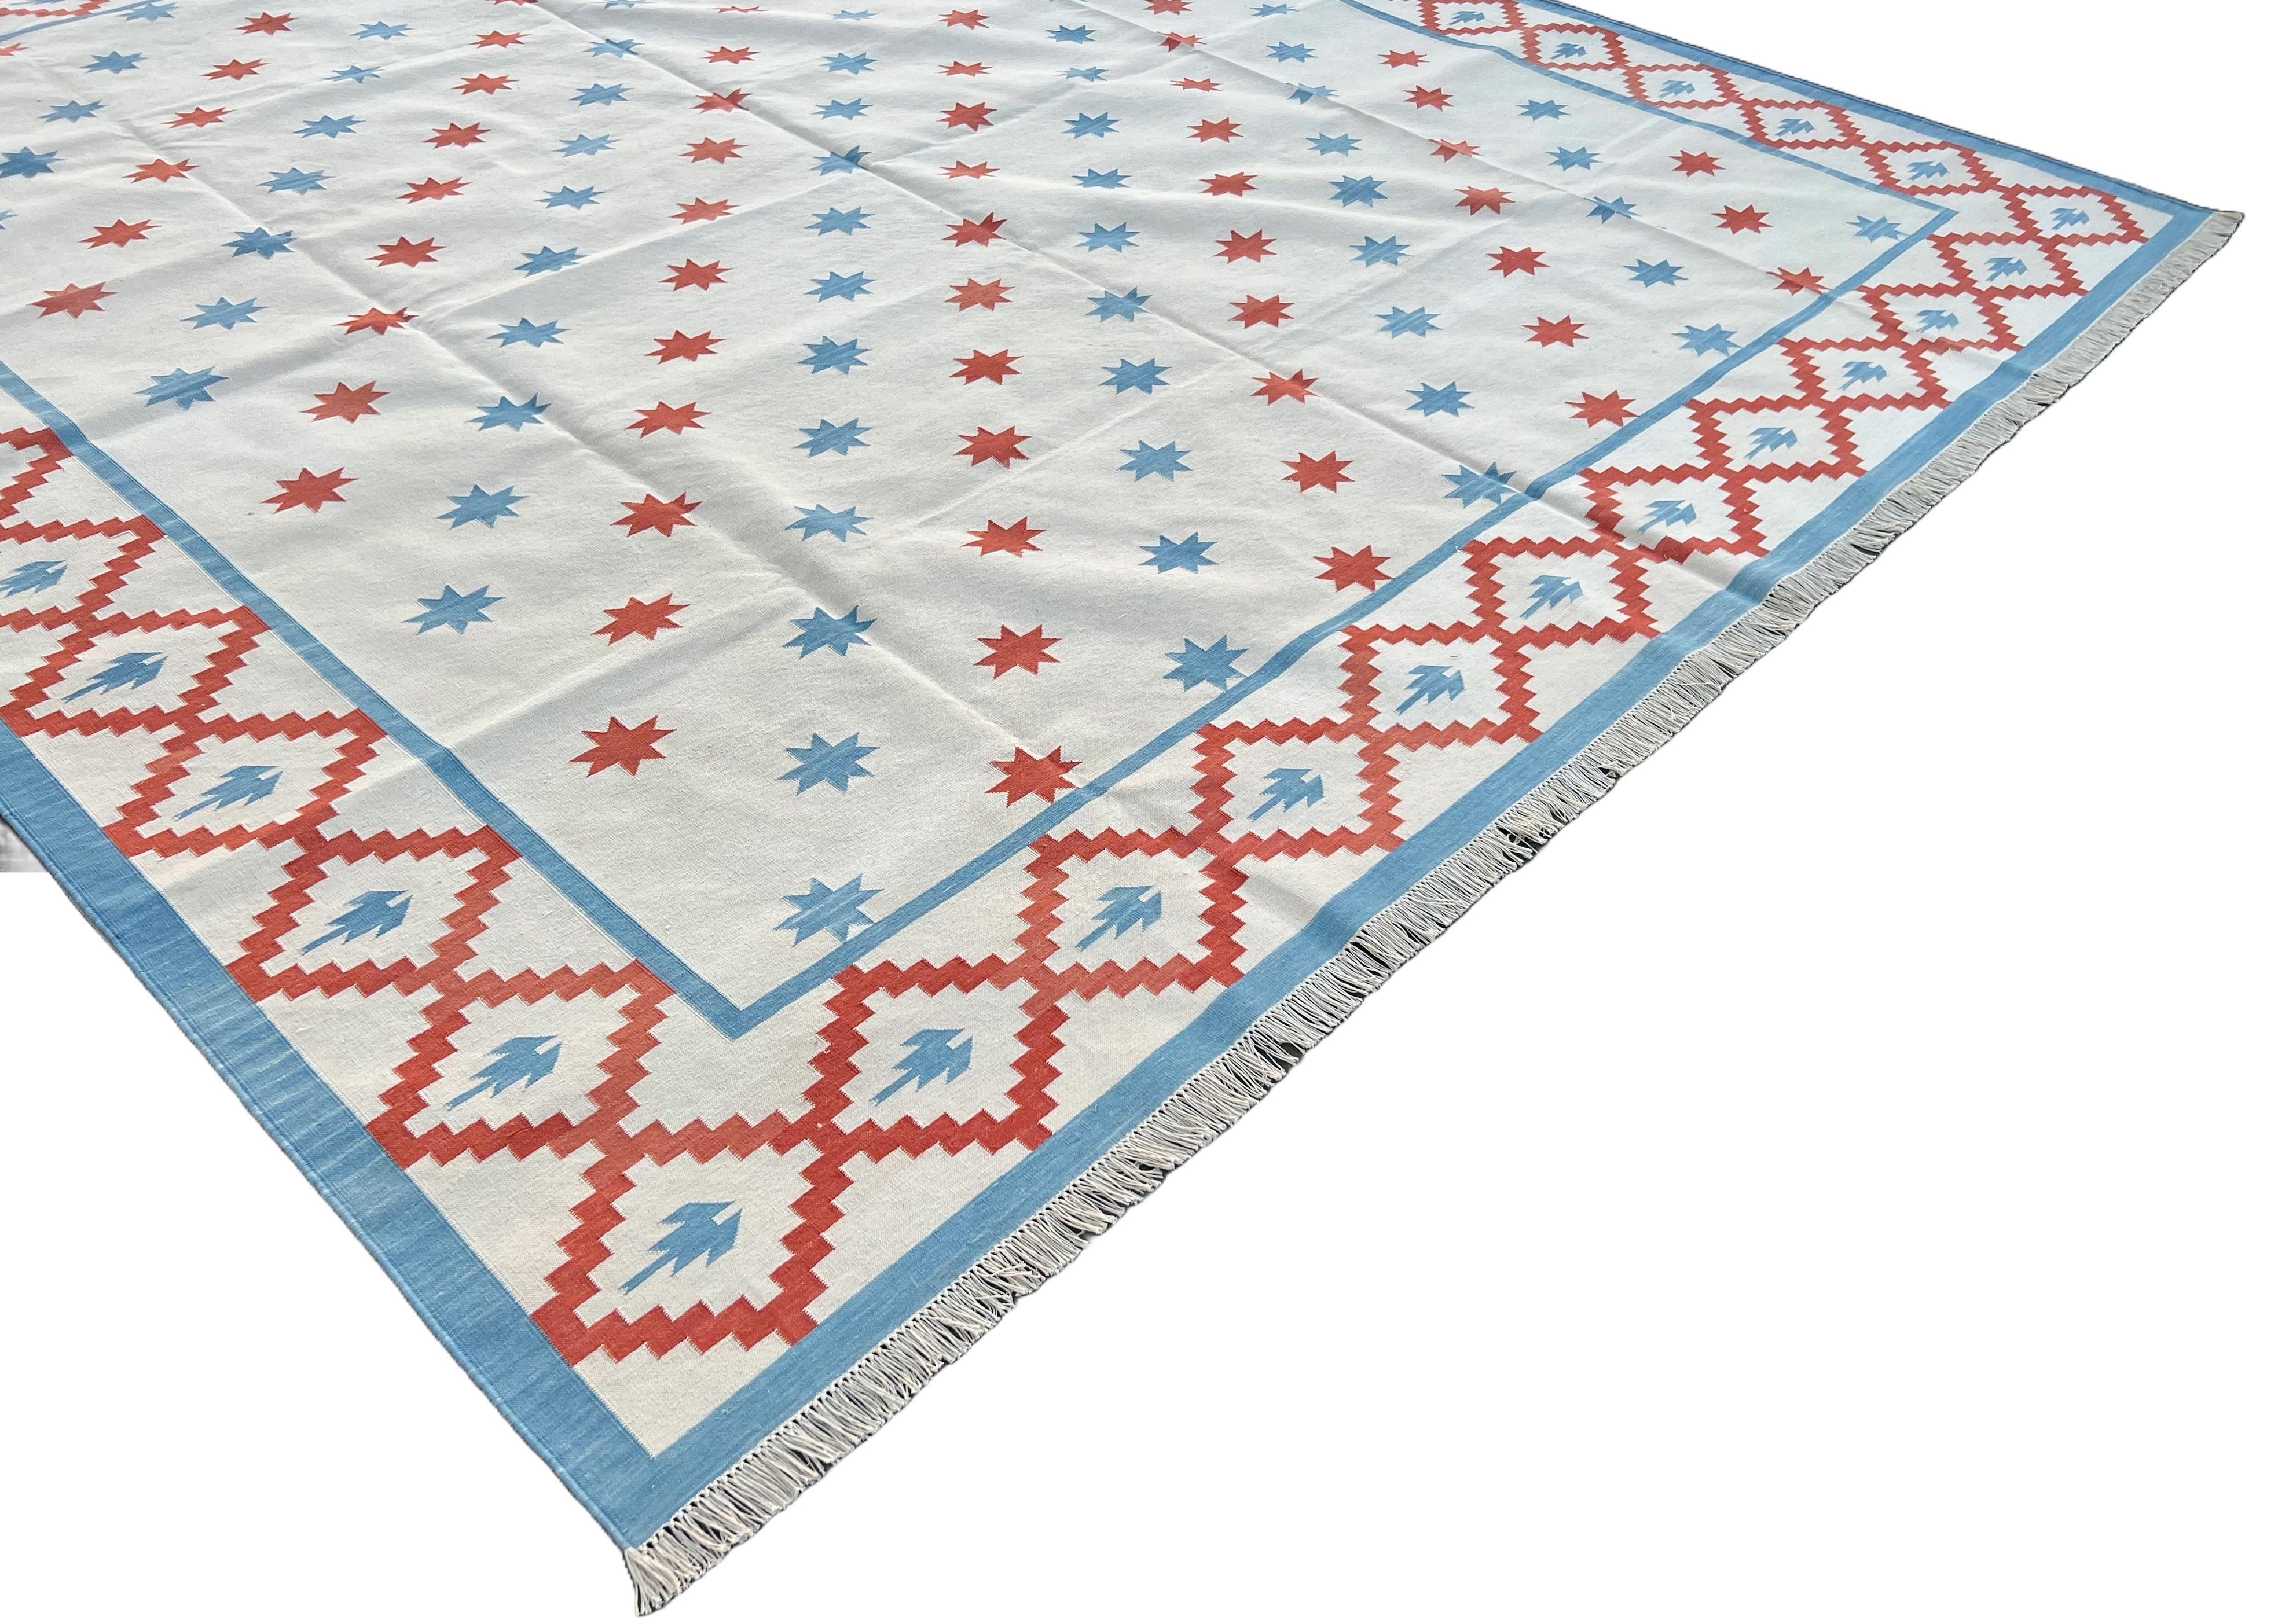 Hand-Woven Handmade Cotton Area Flat Weave Rug, Cream And Red Indian Star Geometric Dhurrie For Sale